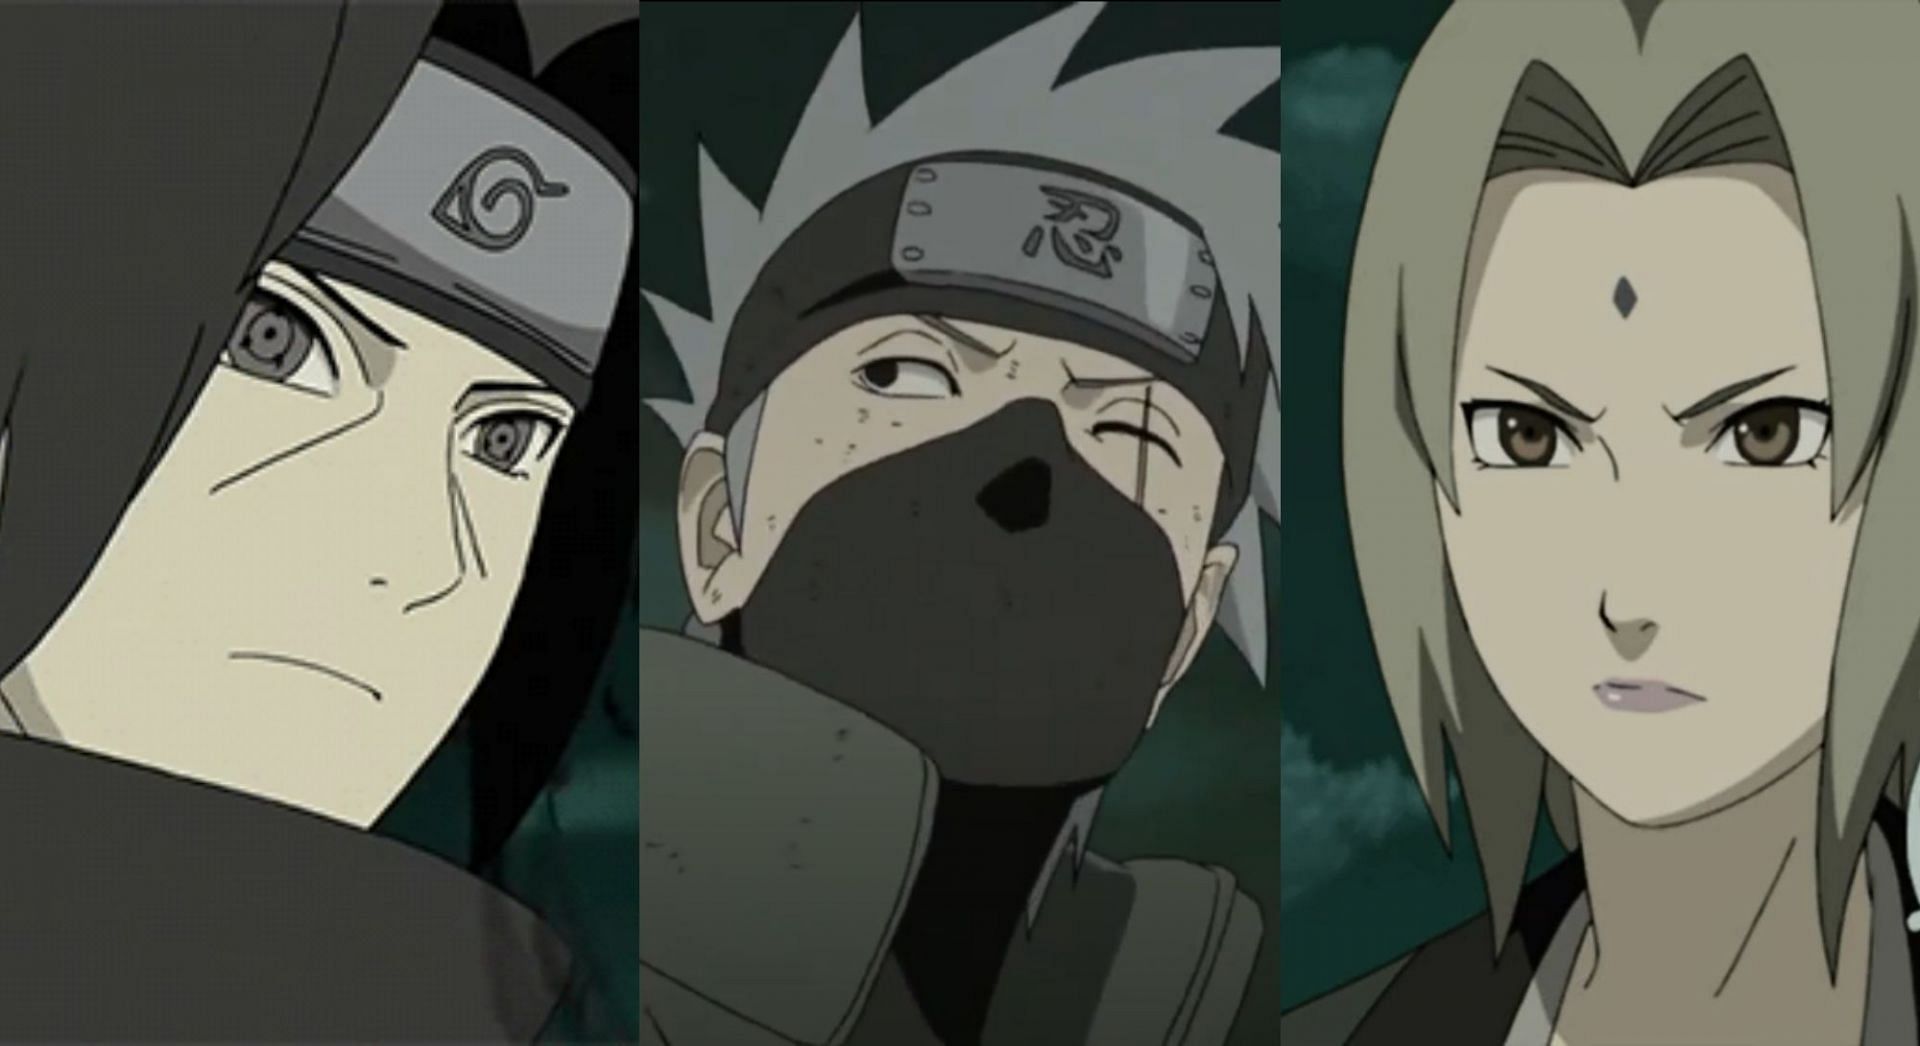 Ranking Top Naruto characters that we'd love to see in a Halloween